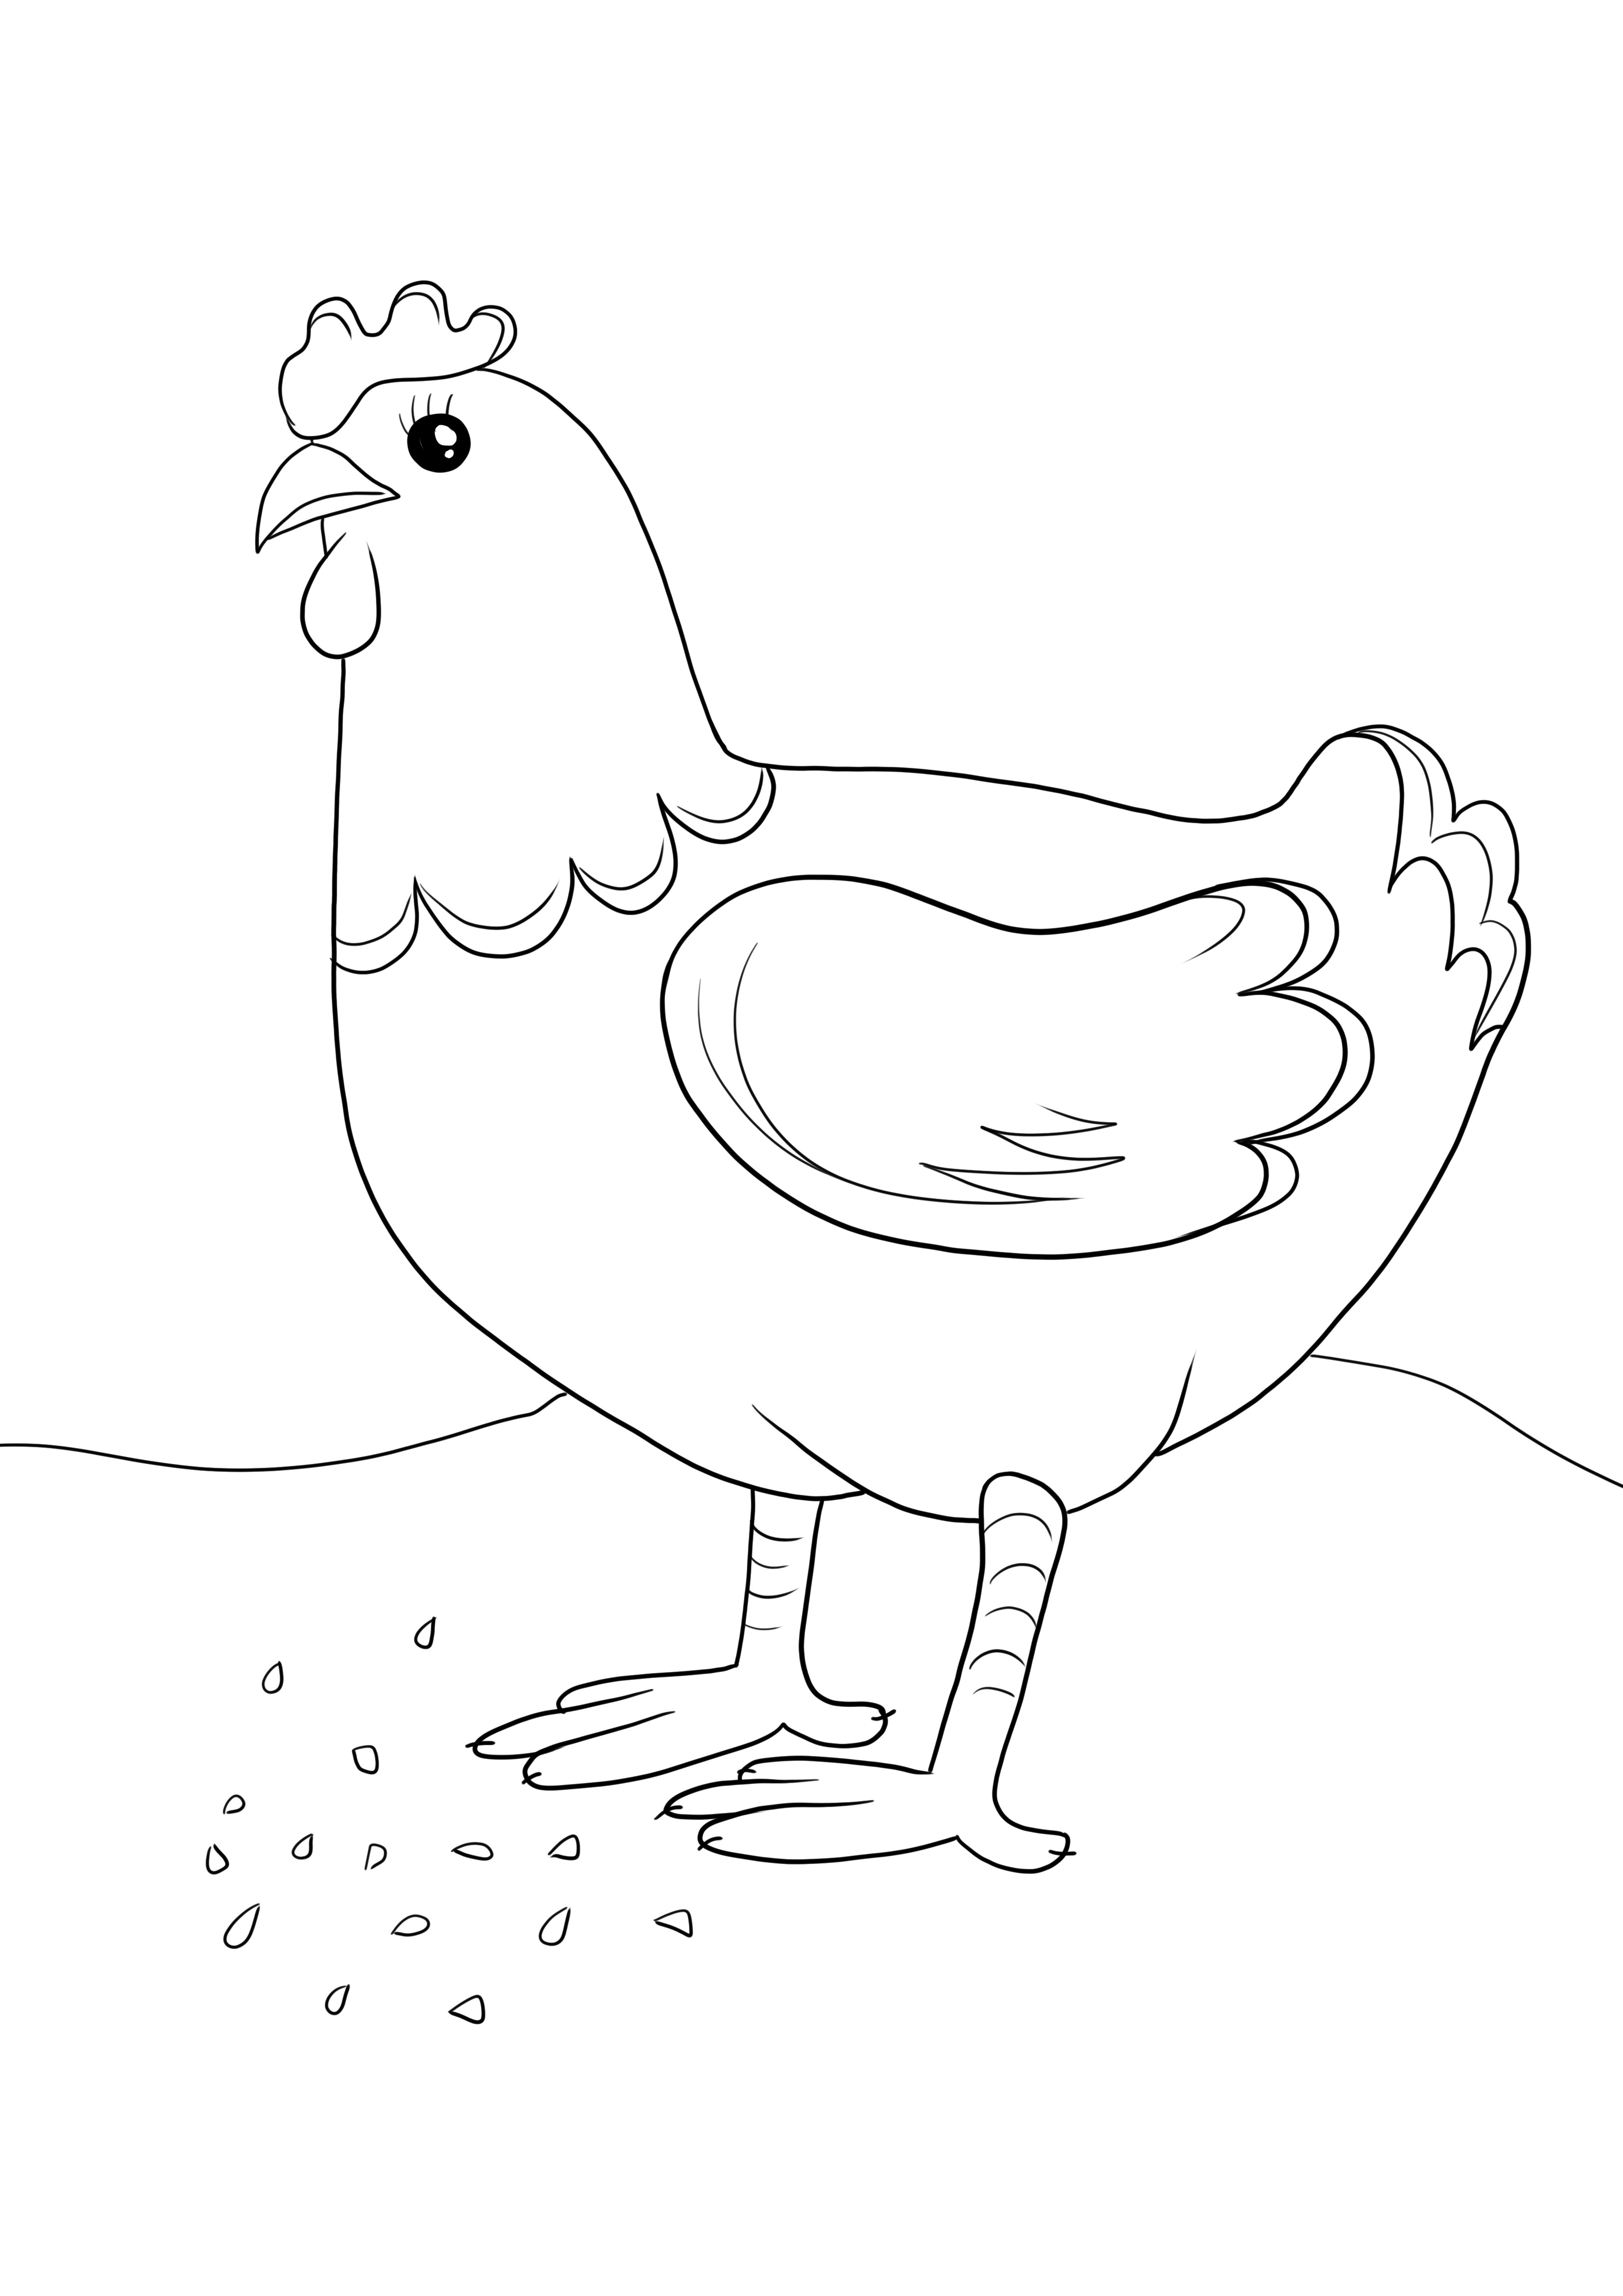 Chicken pecking seeds free downloading and coloring sheet